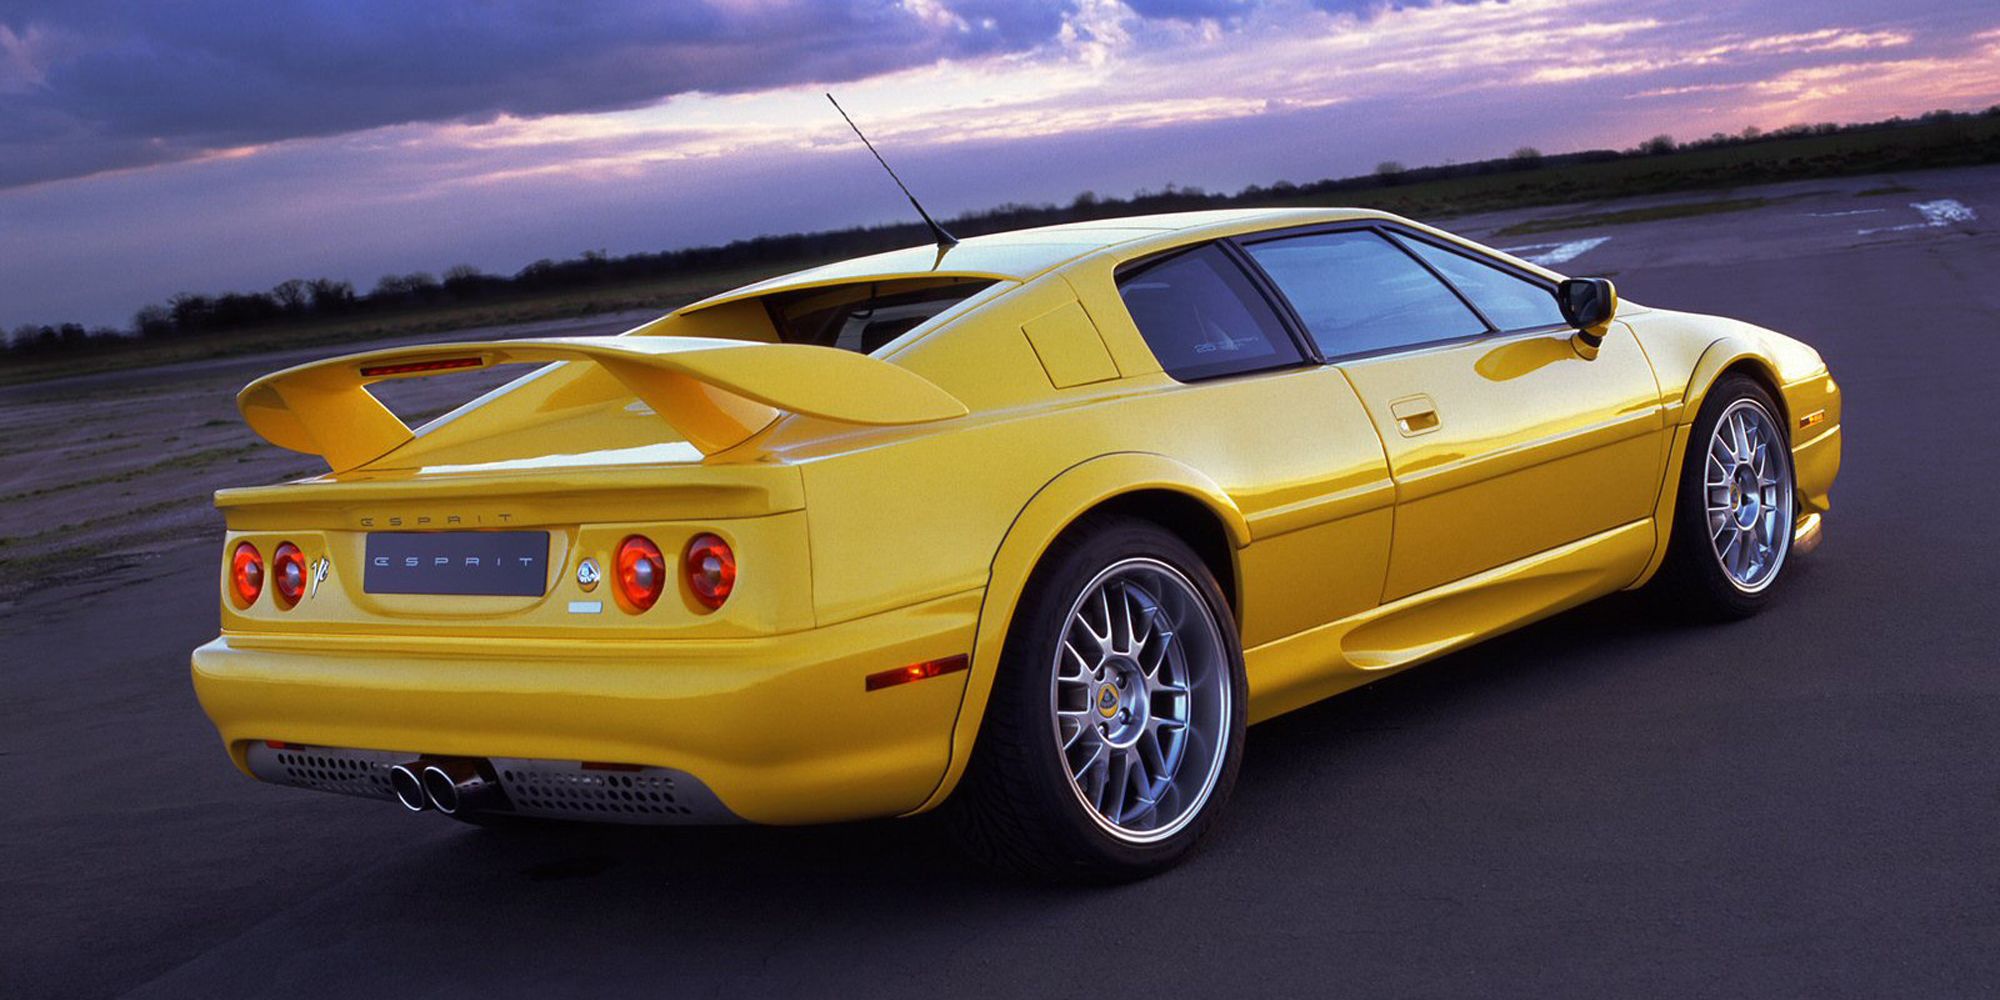 Rear 3/4 view of the Esprit V8, yellow